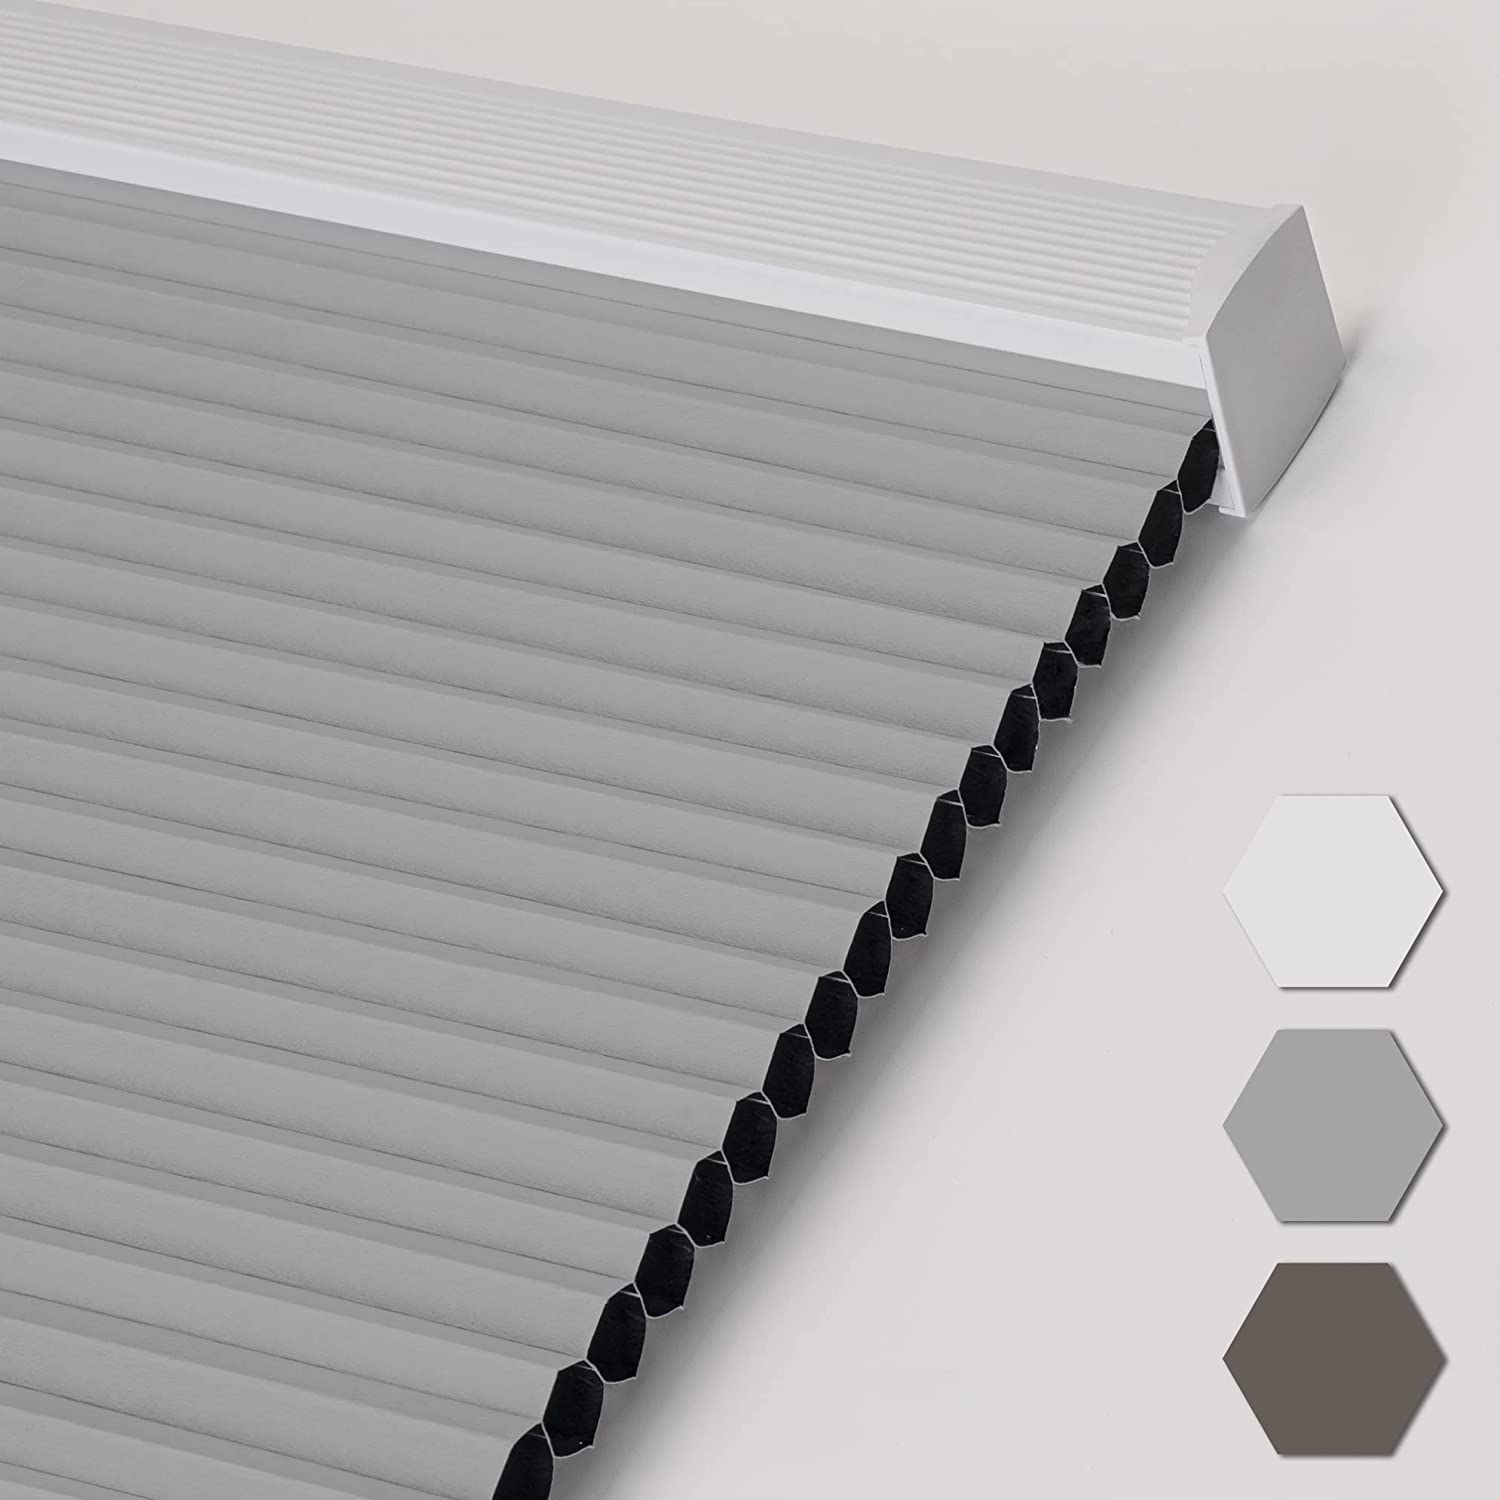 Custom size Honeycomb Shade Blackout blinds,China Honeycomb Shade Blackout Blinds supplier,Supply Honeycomb Shade Blackout blinds manufacturers in large quantities